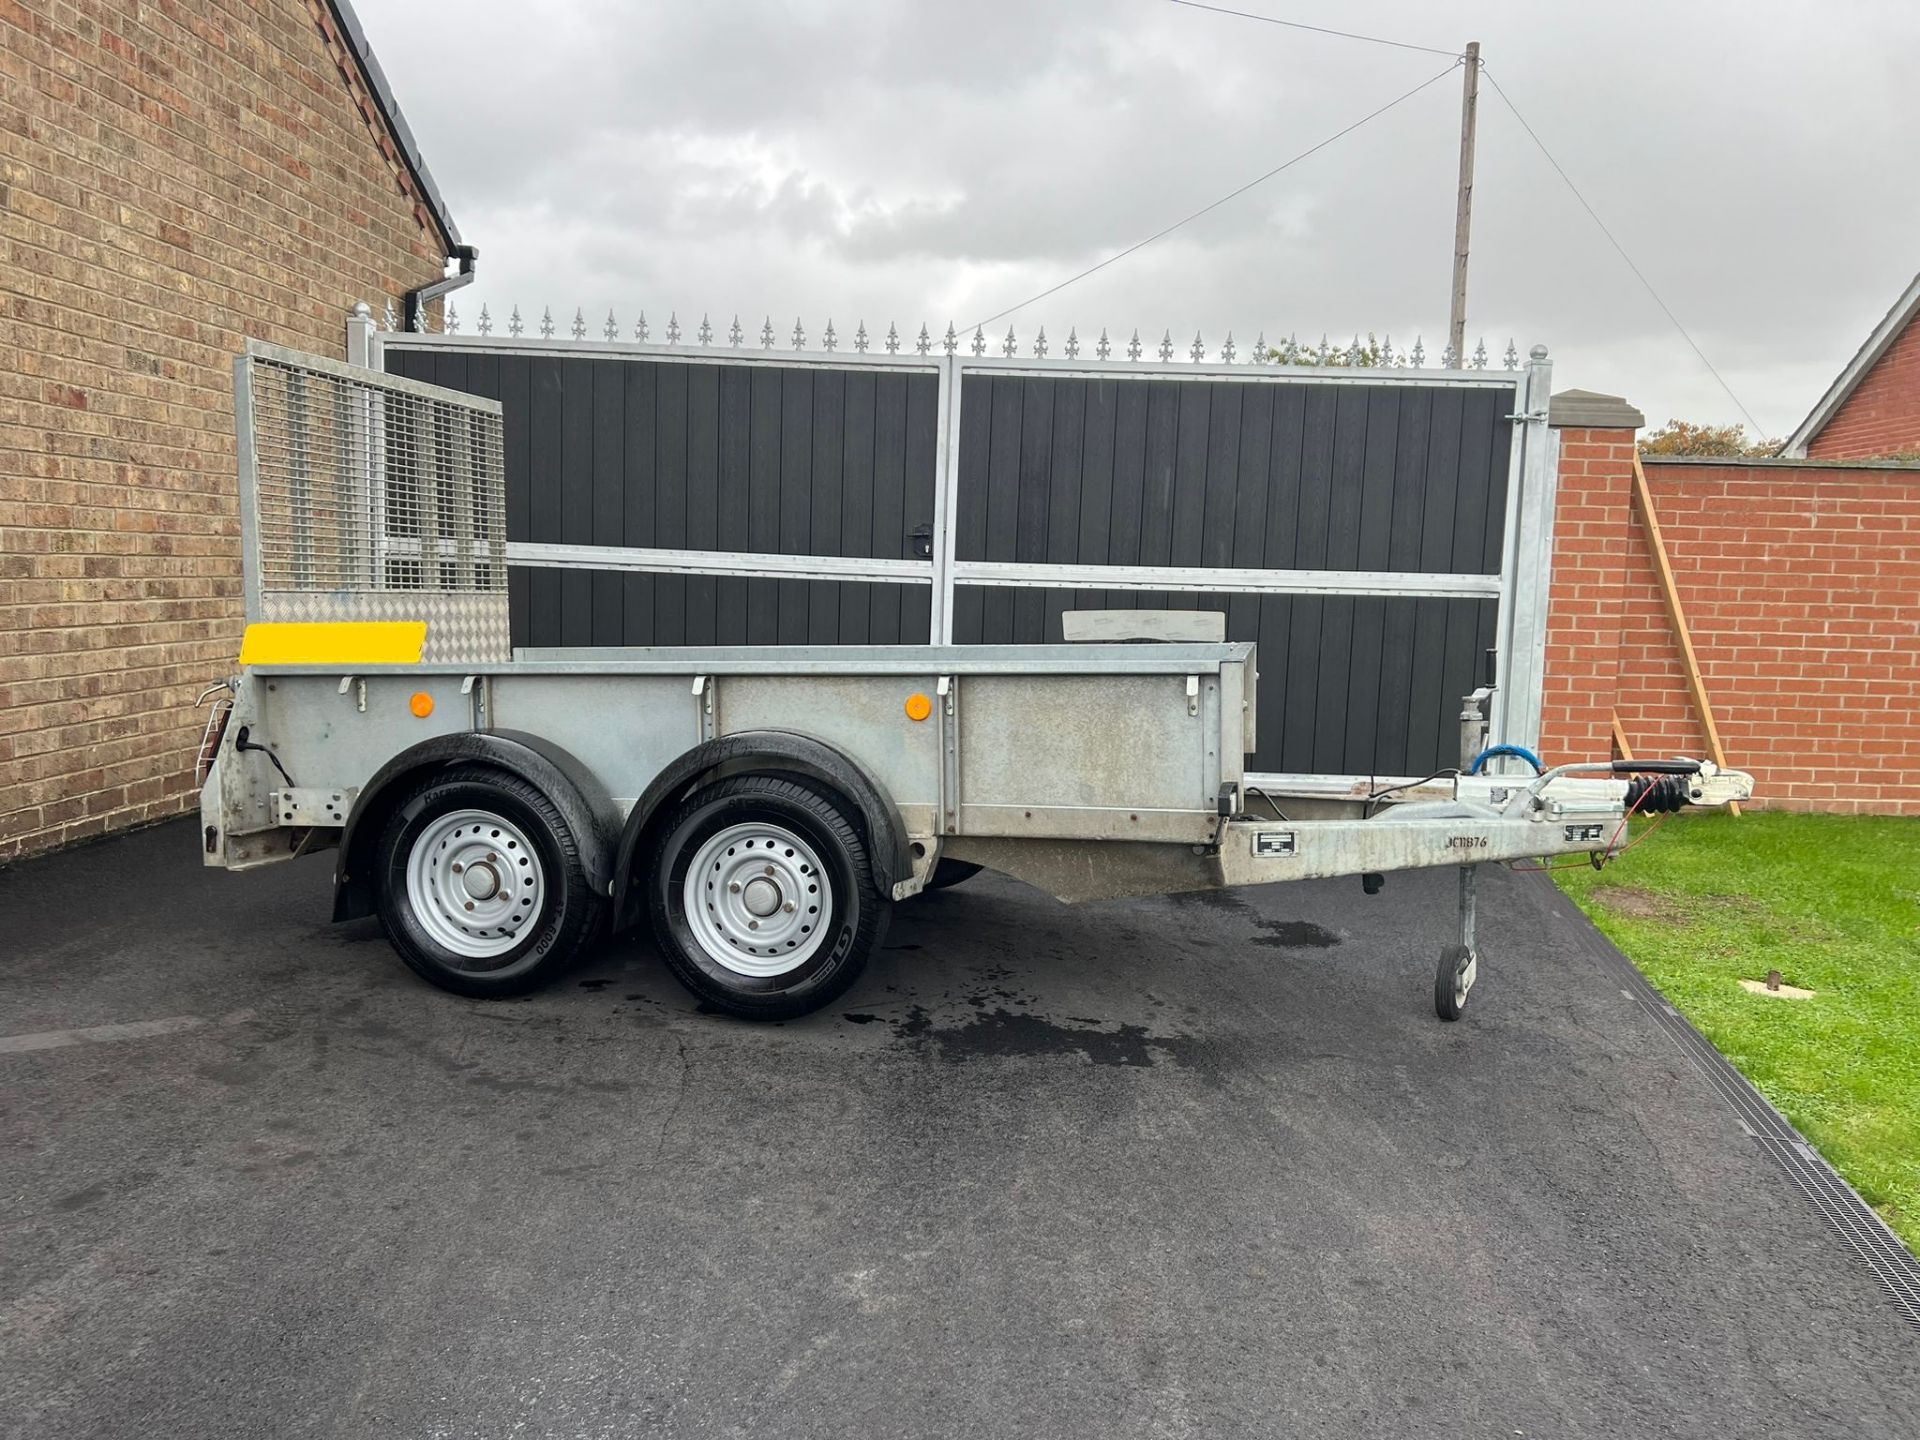 Ifor Williams GD84 Trailer - Year 2018 - Drop down ramp - good tyres all around - Image 2 of 10